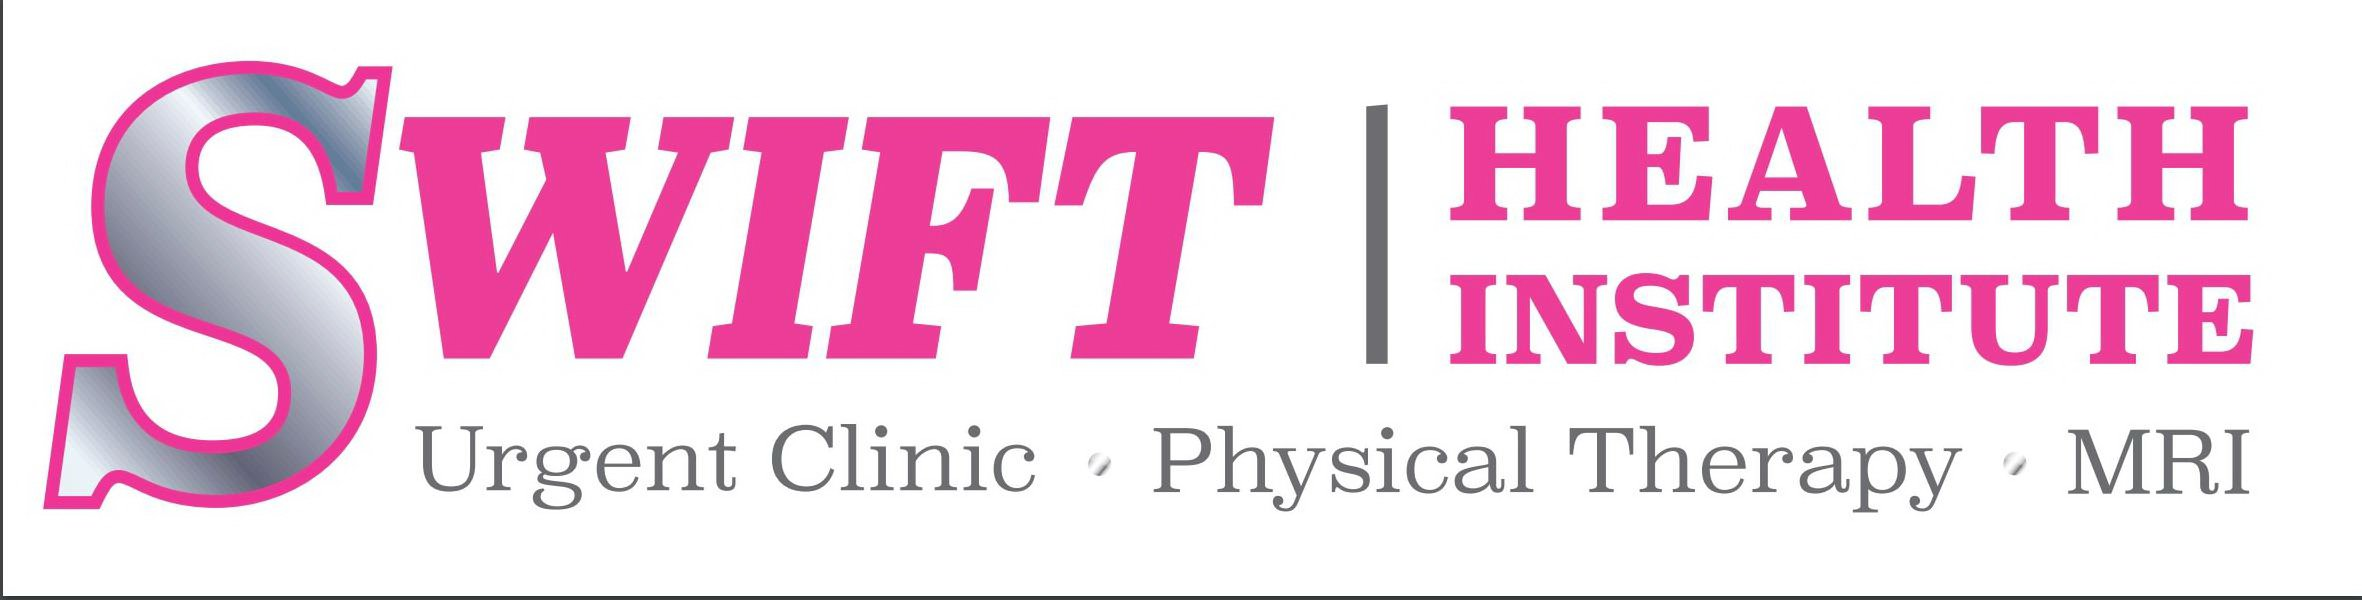  SWIFT | HEALTH INSTITUTE 2ND LINE URGENT CLINIC * PHYSICAL THERAPY * MRI